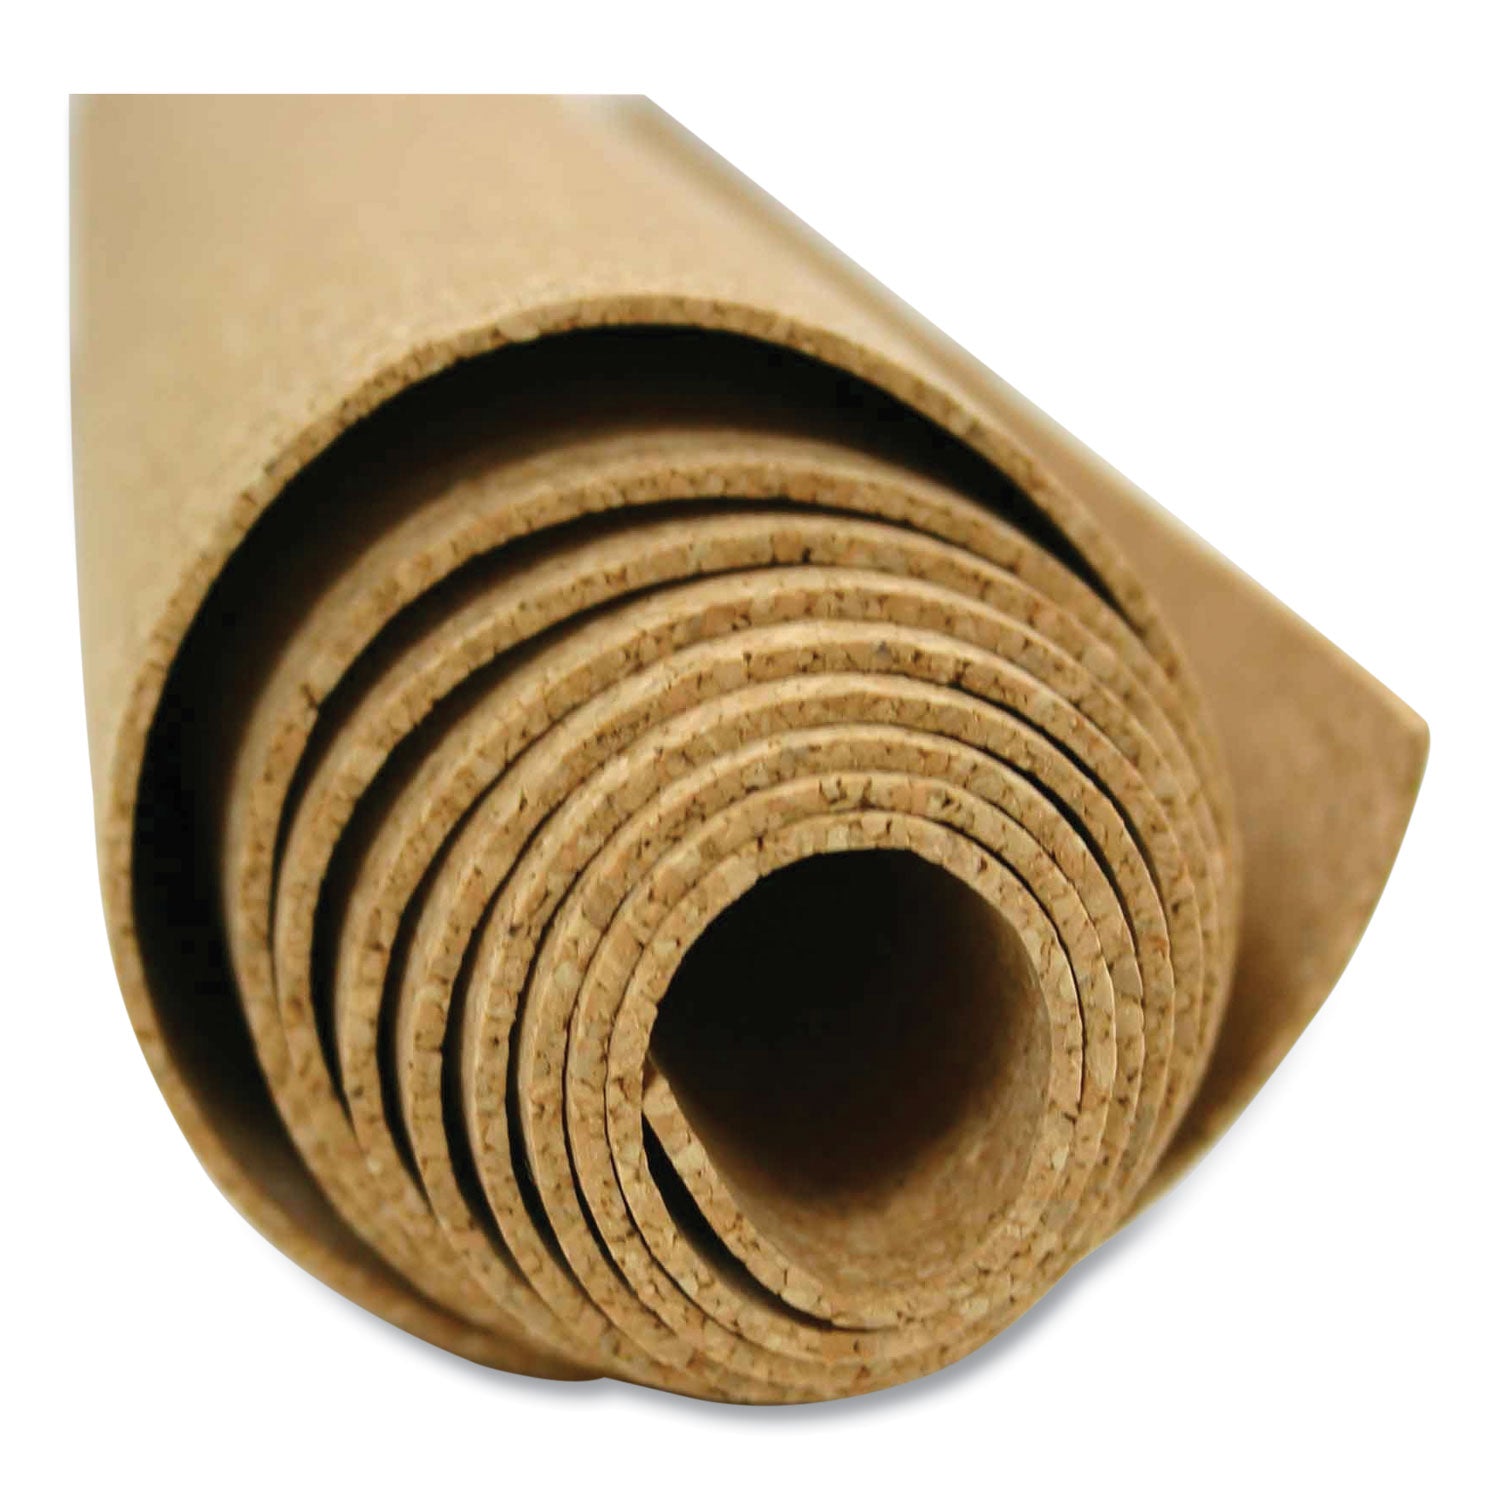 natural-cork-roll-025-thick-144-x-485-natural-brown-surface-ships-in-7-10-business-days_ghe14rk412 - 1